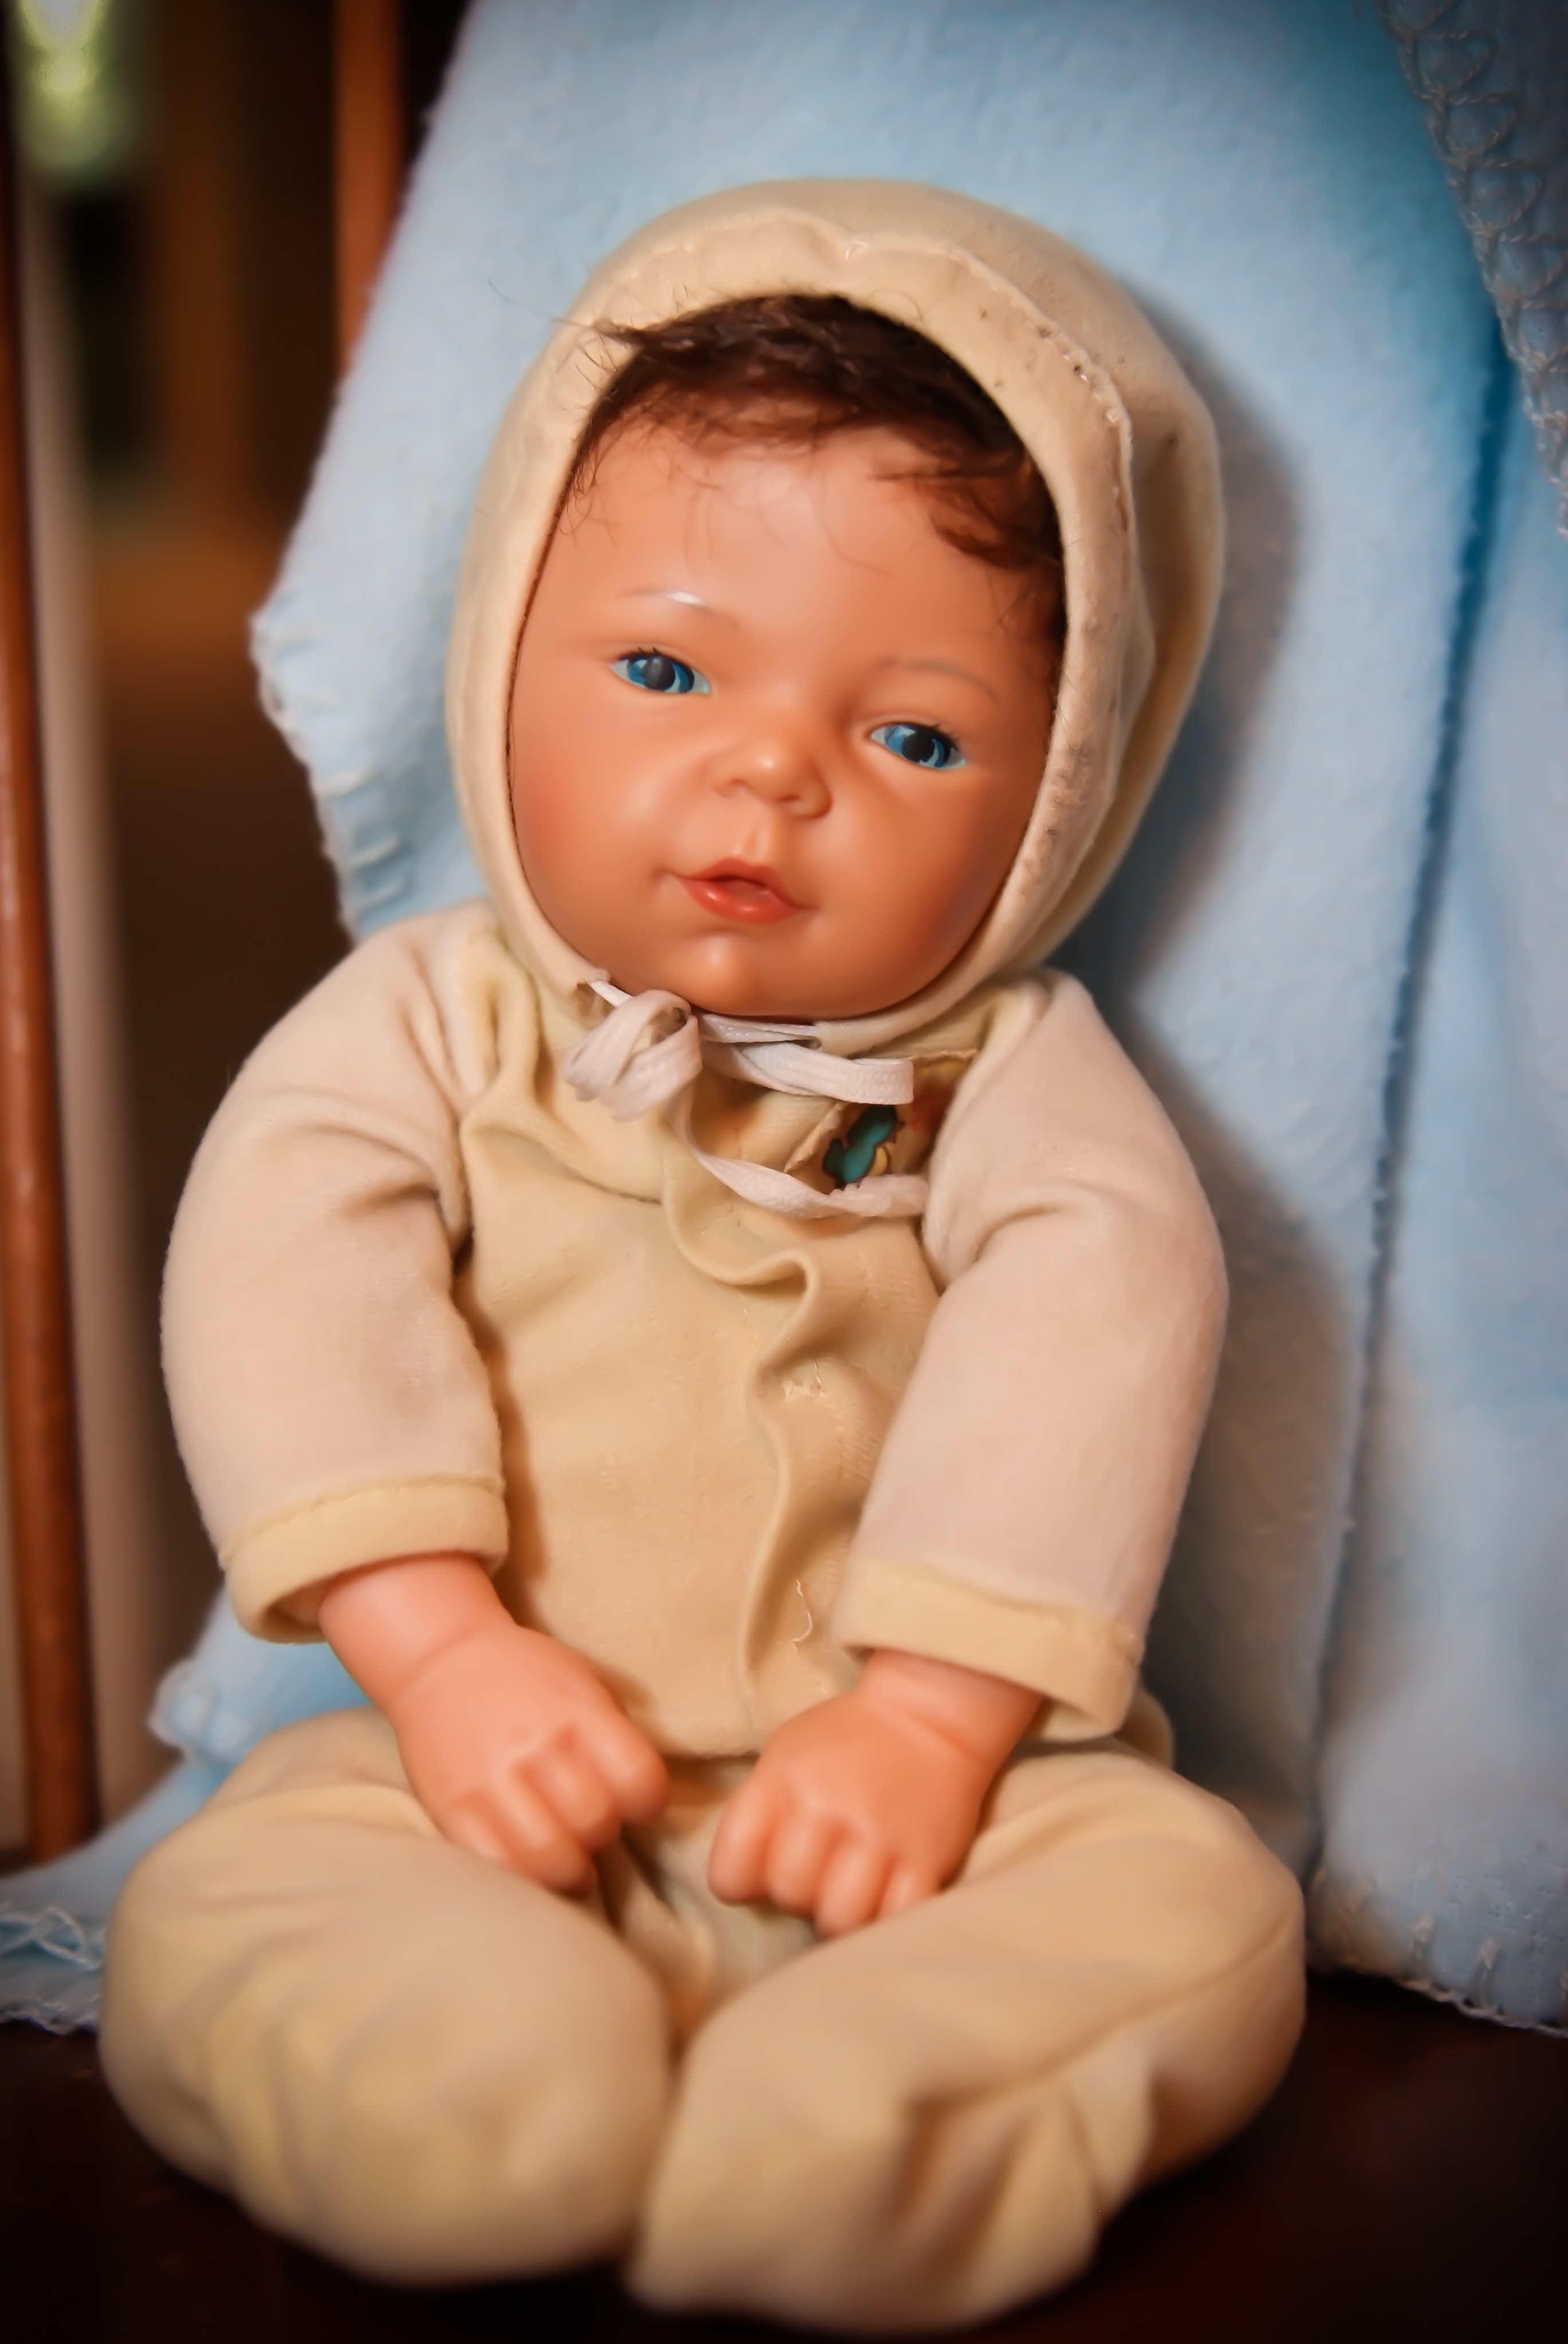 My Real Baby Doll 1980s - Bing images